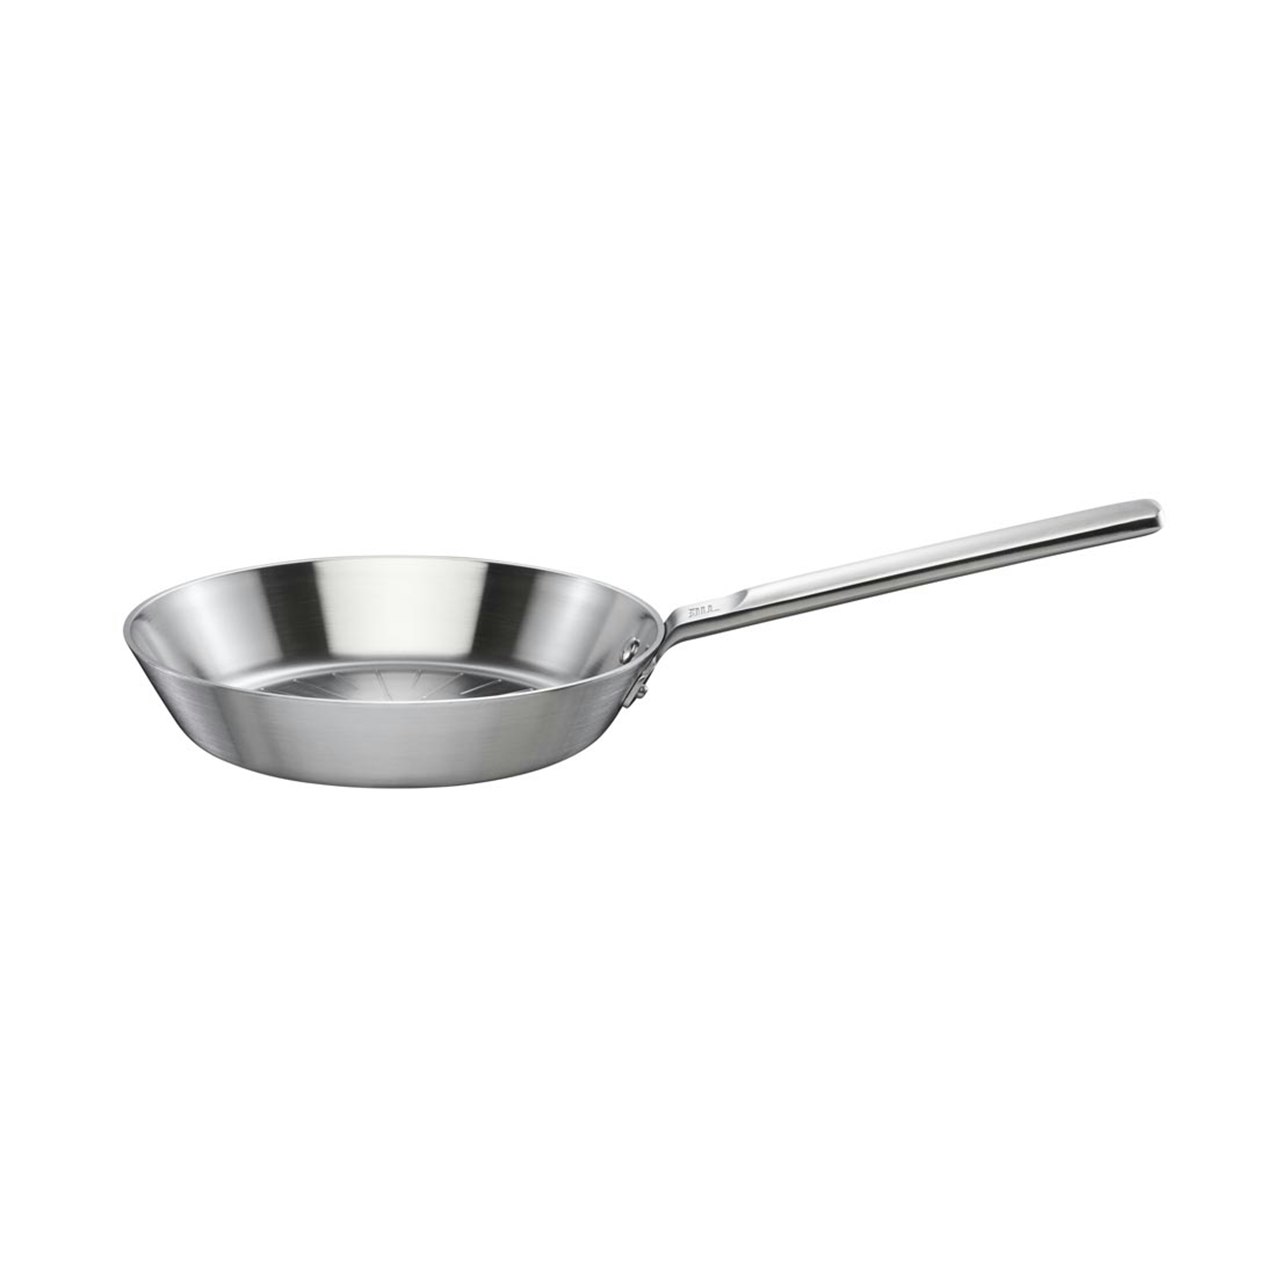 https://royaldesign.com/image/2/fiskars-norden-frying-pan-uncoated-stainless-steel-1?w=800&quality=80